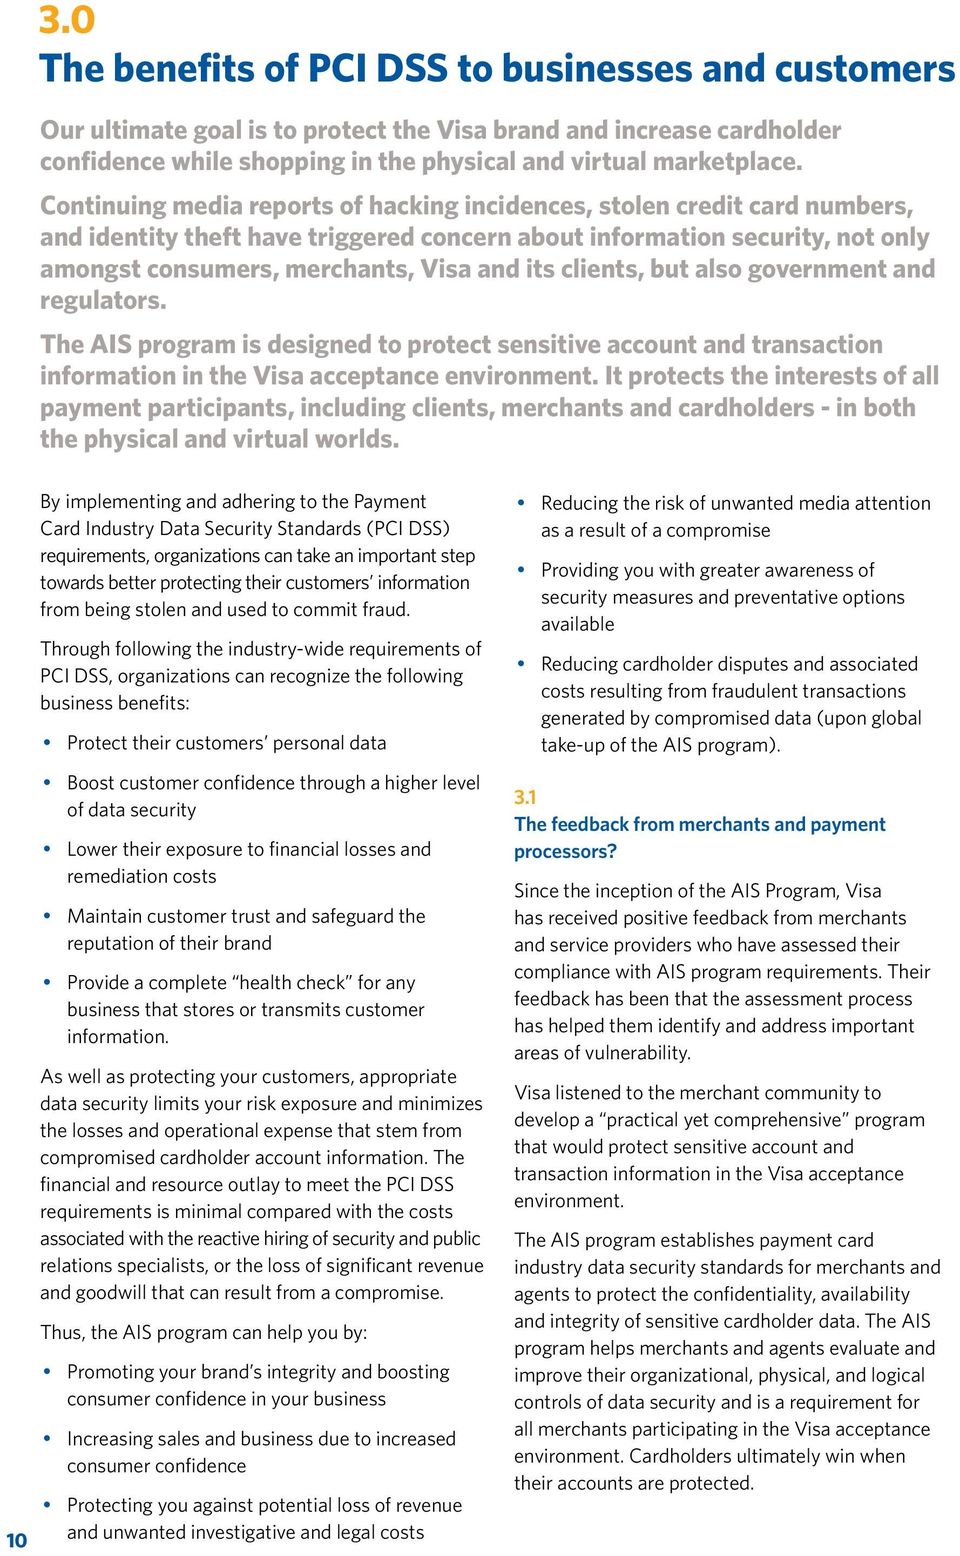 clients, but also government and regulators. The AIS program is designed to protect sensitive account and transaction information in the Visa acceptance environment.